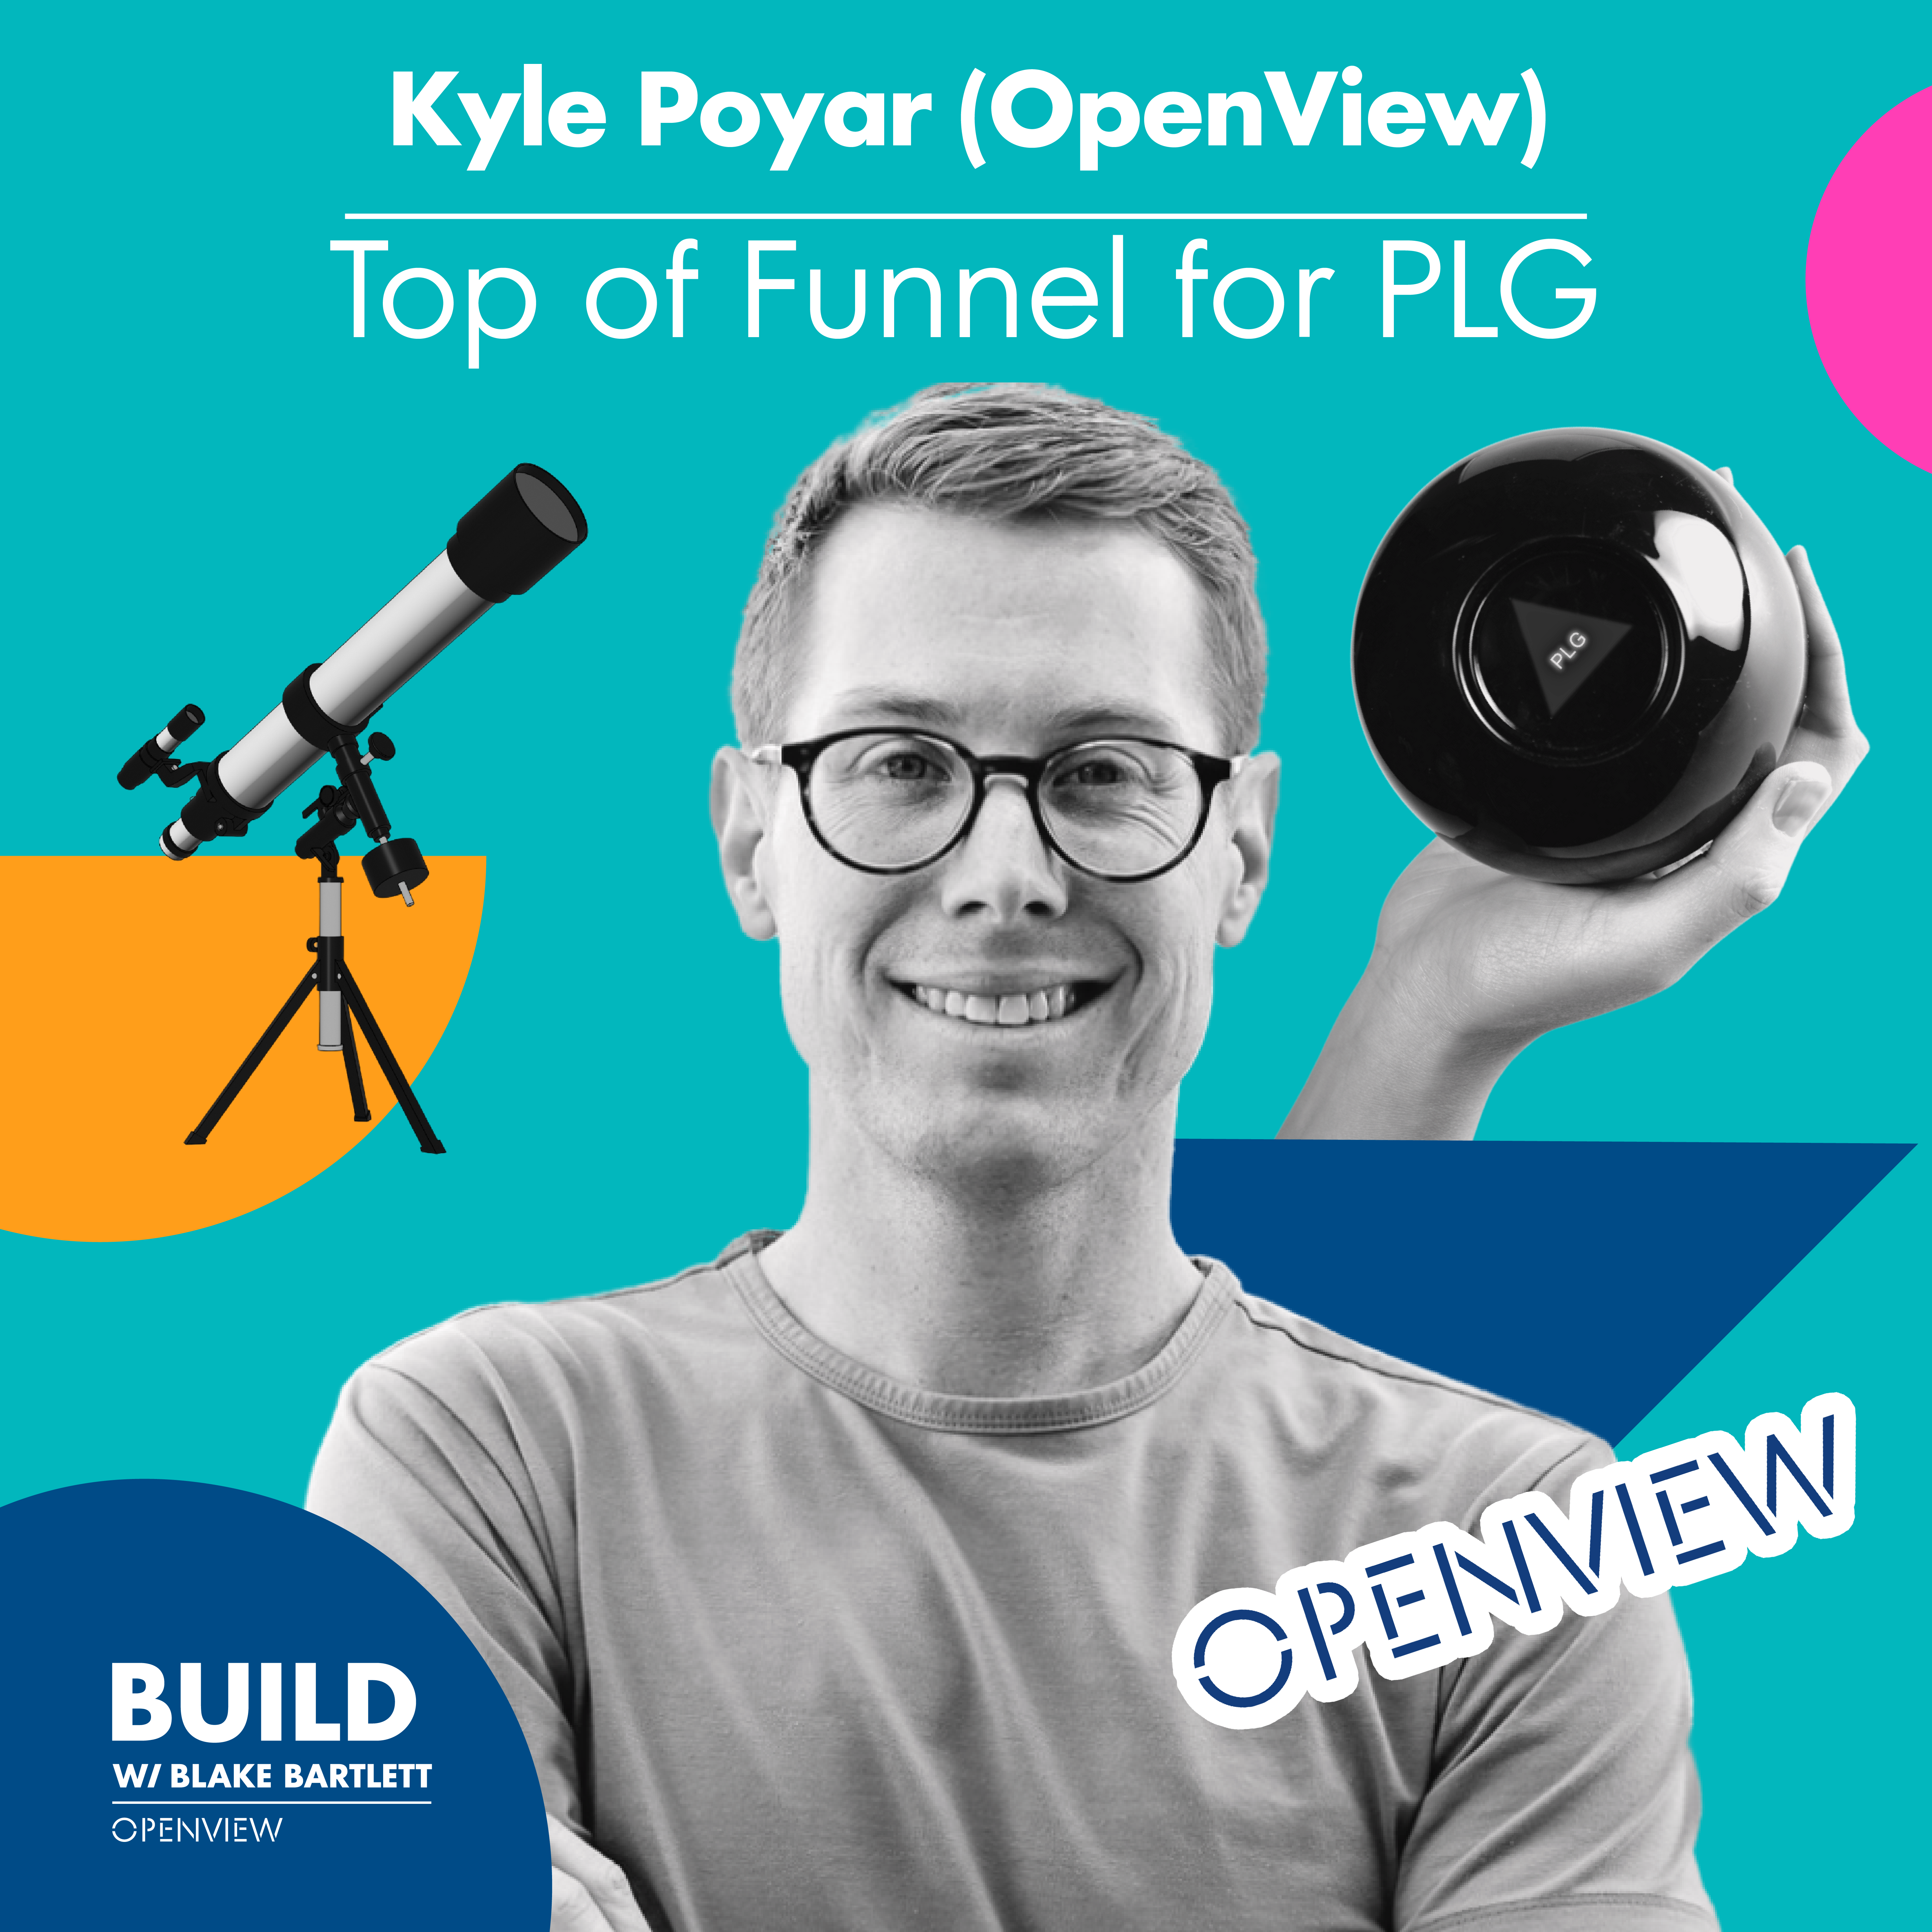 Kyle Poyar (OpenView): Top of Funnel for PLG